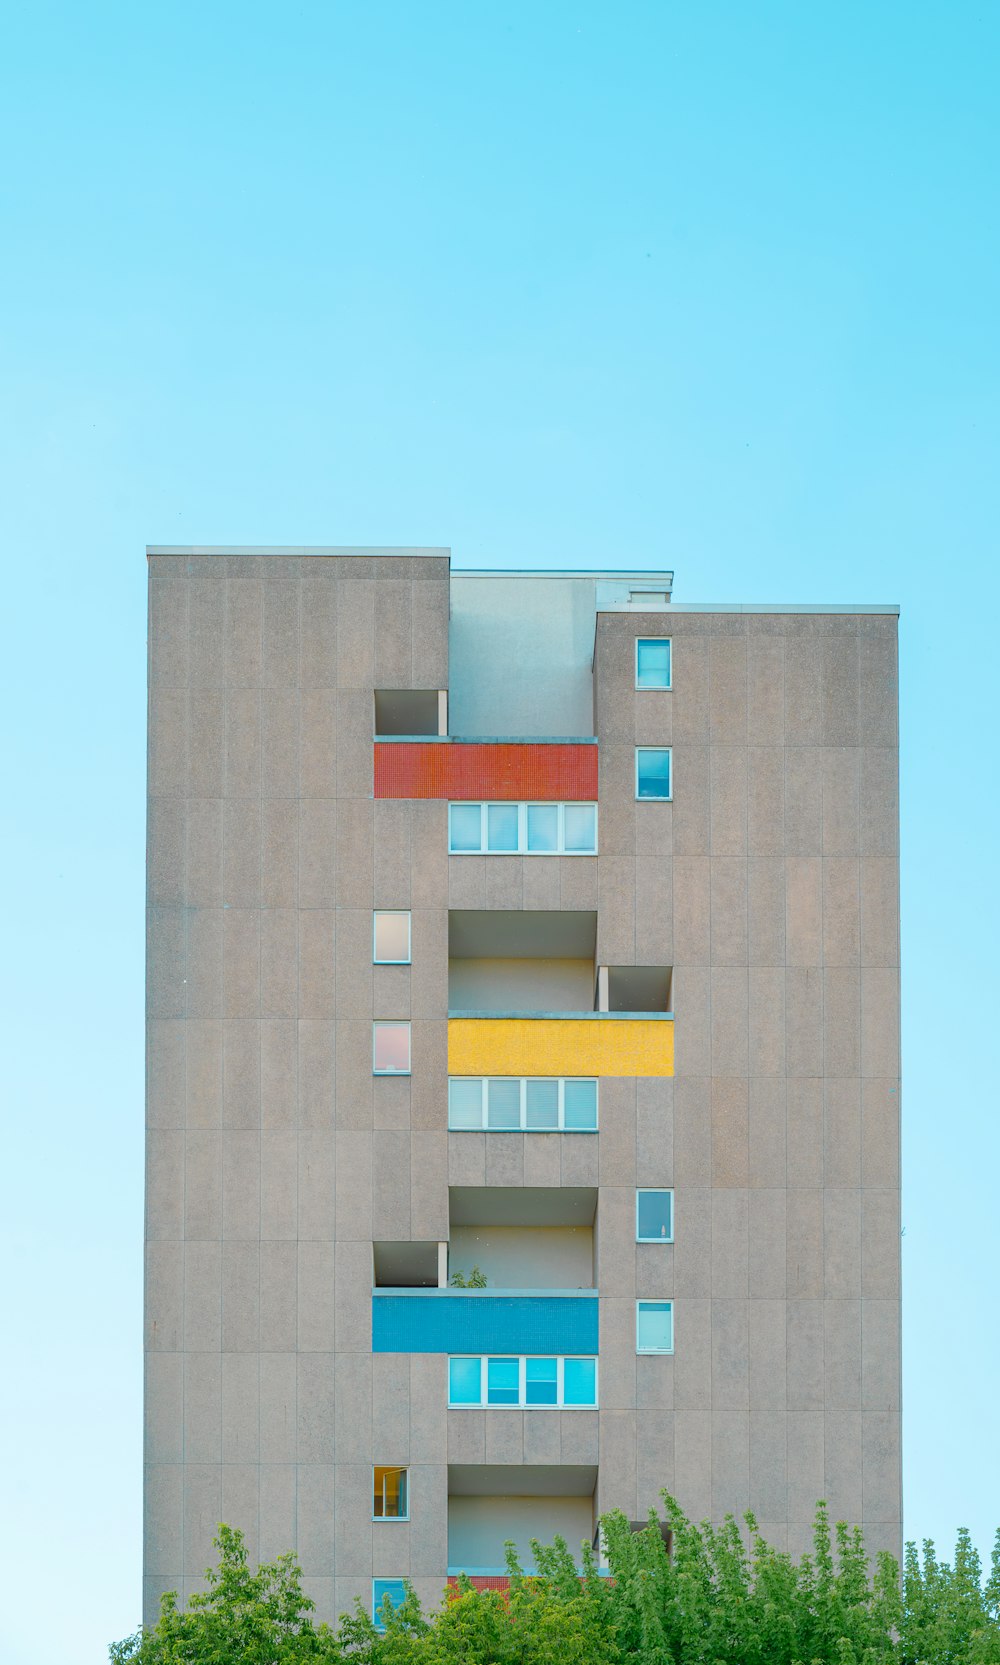 a tall building with multicolored balconies on the side